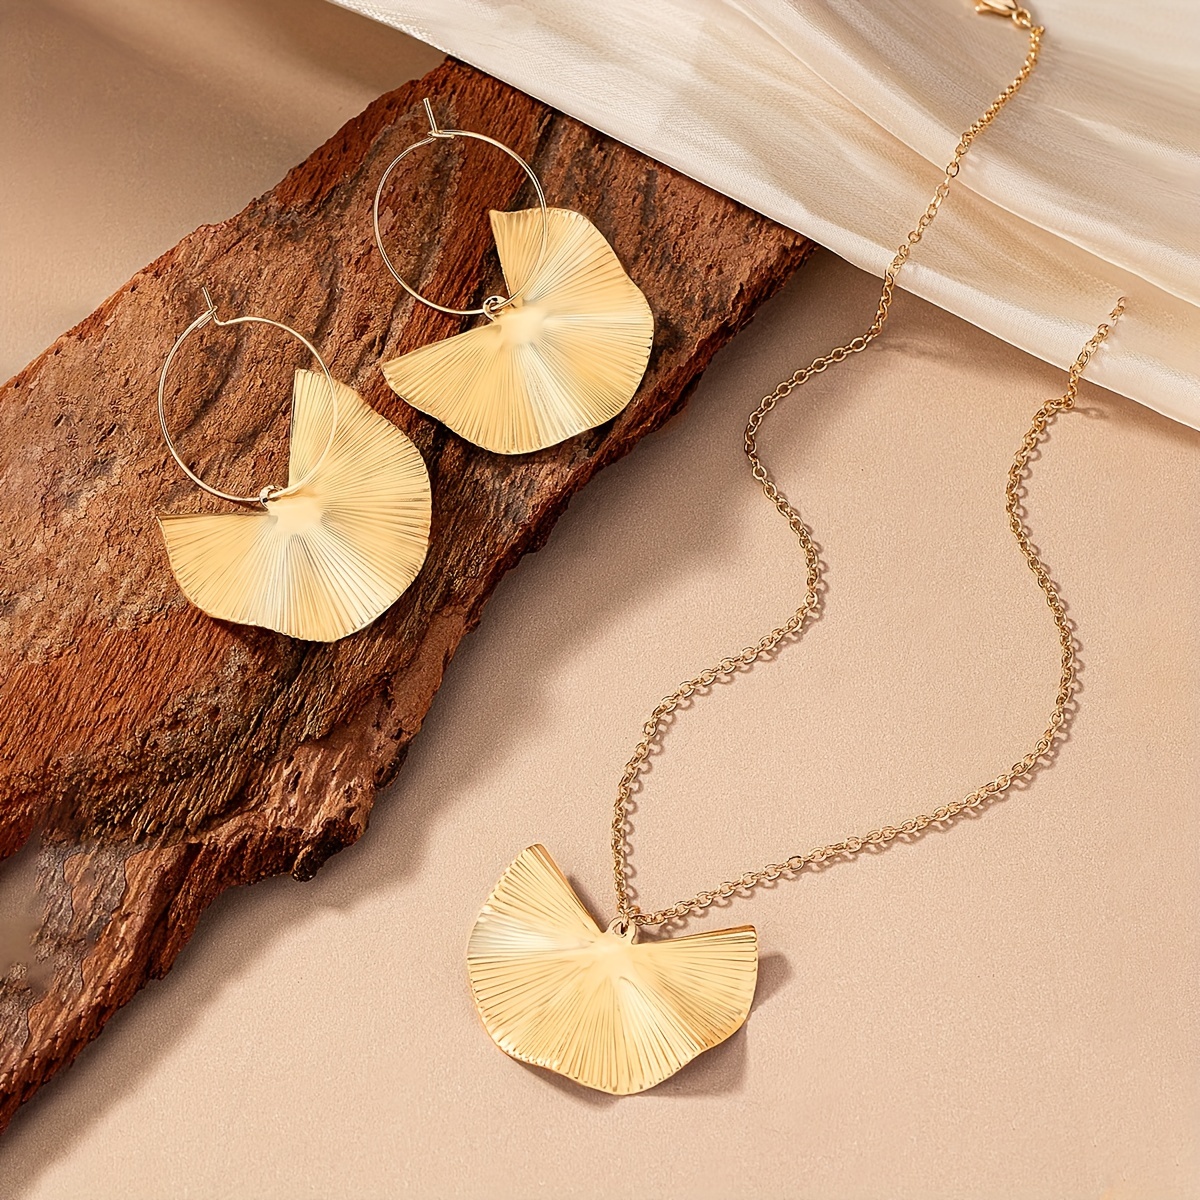 

1 Pair Of Earrings + 1 Necklace Stylish Jewelry Set Special Ginkgo Leaf Design 14k Plated Match Daily Outfits Party Accessories